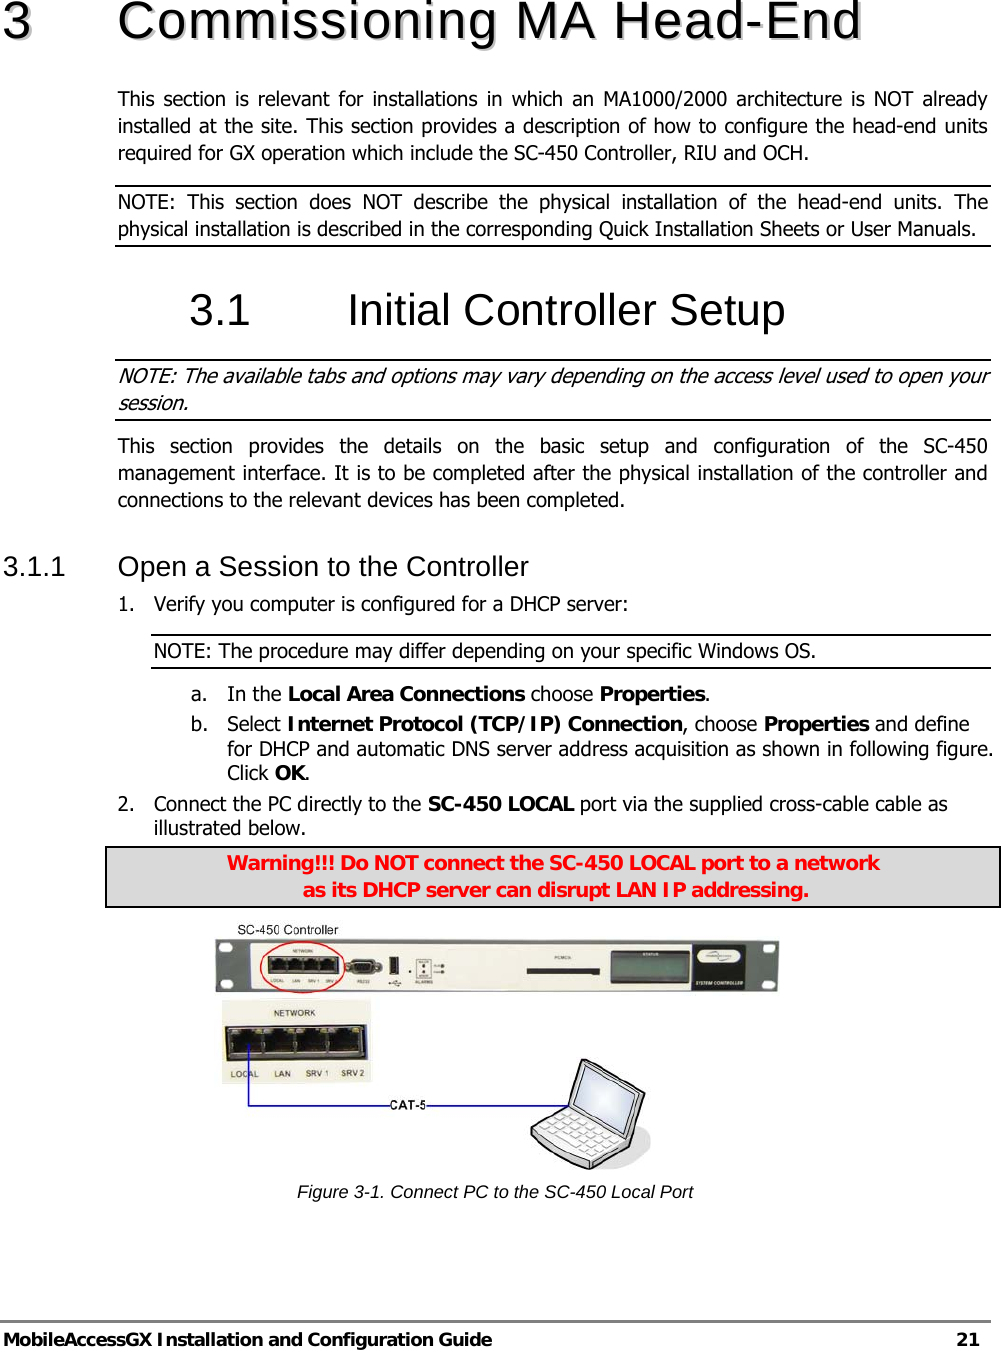   MobileAccessGX Installation and Configuration Guide   21  33  CCoommmmiissssiioonniinngg  MMAA  HHeeaadd--EEnndd    This section is relevant for installations in which an MA1000/2000 architecture is NOT already installed at the site. This section provides a description of how to configure the head-end units required for GX operation which include the SC-450 Controller, RIU and OCH.  NOTE: This section does NOT describe the physical installation of the head-end units. The physical installation is described in the corresponding Quick Installation Sheets or User Manuals. 3.1 Initial Controller Setup NOTE: The available tabs and options may vary depending on the access level used to open your session. This section provides the details on the basic setup and configuration of the SC-450 management interface. It is to be completed after the physical installation of the controller and connections to the relevant devices has been completed. 3.1.1  Open a Session to the Controller 1.  Verify you computer is configured for a DHCP server: NOTE: The procedure may differ depending on your specific Windows OS. a. In the Local Area Connections choose Properties. b. Select Internet Protocol (TCP/IP) Connection, choose Properties and define for DHCP and automatic DNS server address acquisition as shown in following figure. Click OK. 2.  Connect the PC directly to the SC-450 LOCAL port via the supplied cross-cable cable as illustrated below.  Warning!!! Do NOT connect the SC-450 LOCAL port to a network  as its DHCP server can disrupt LAN IP addressing.  Figure 3-1. Connect PC to the SC-450 Local Port   Supplied Ethernet cross-cable 